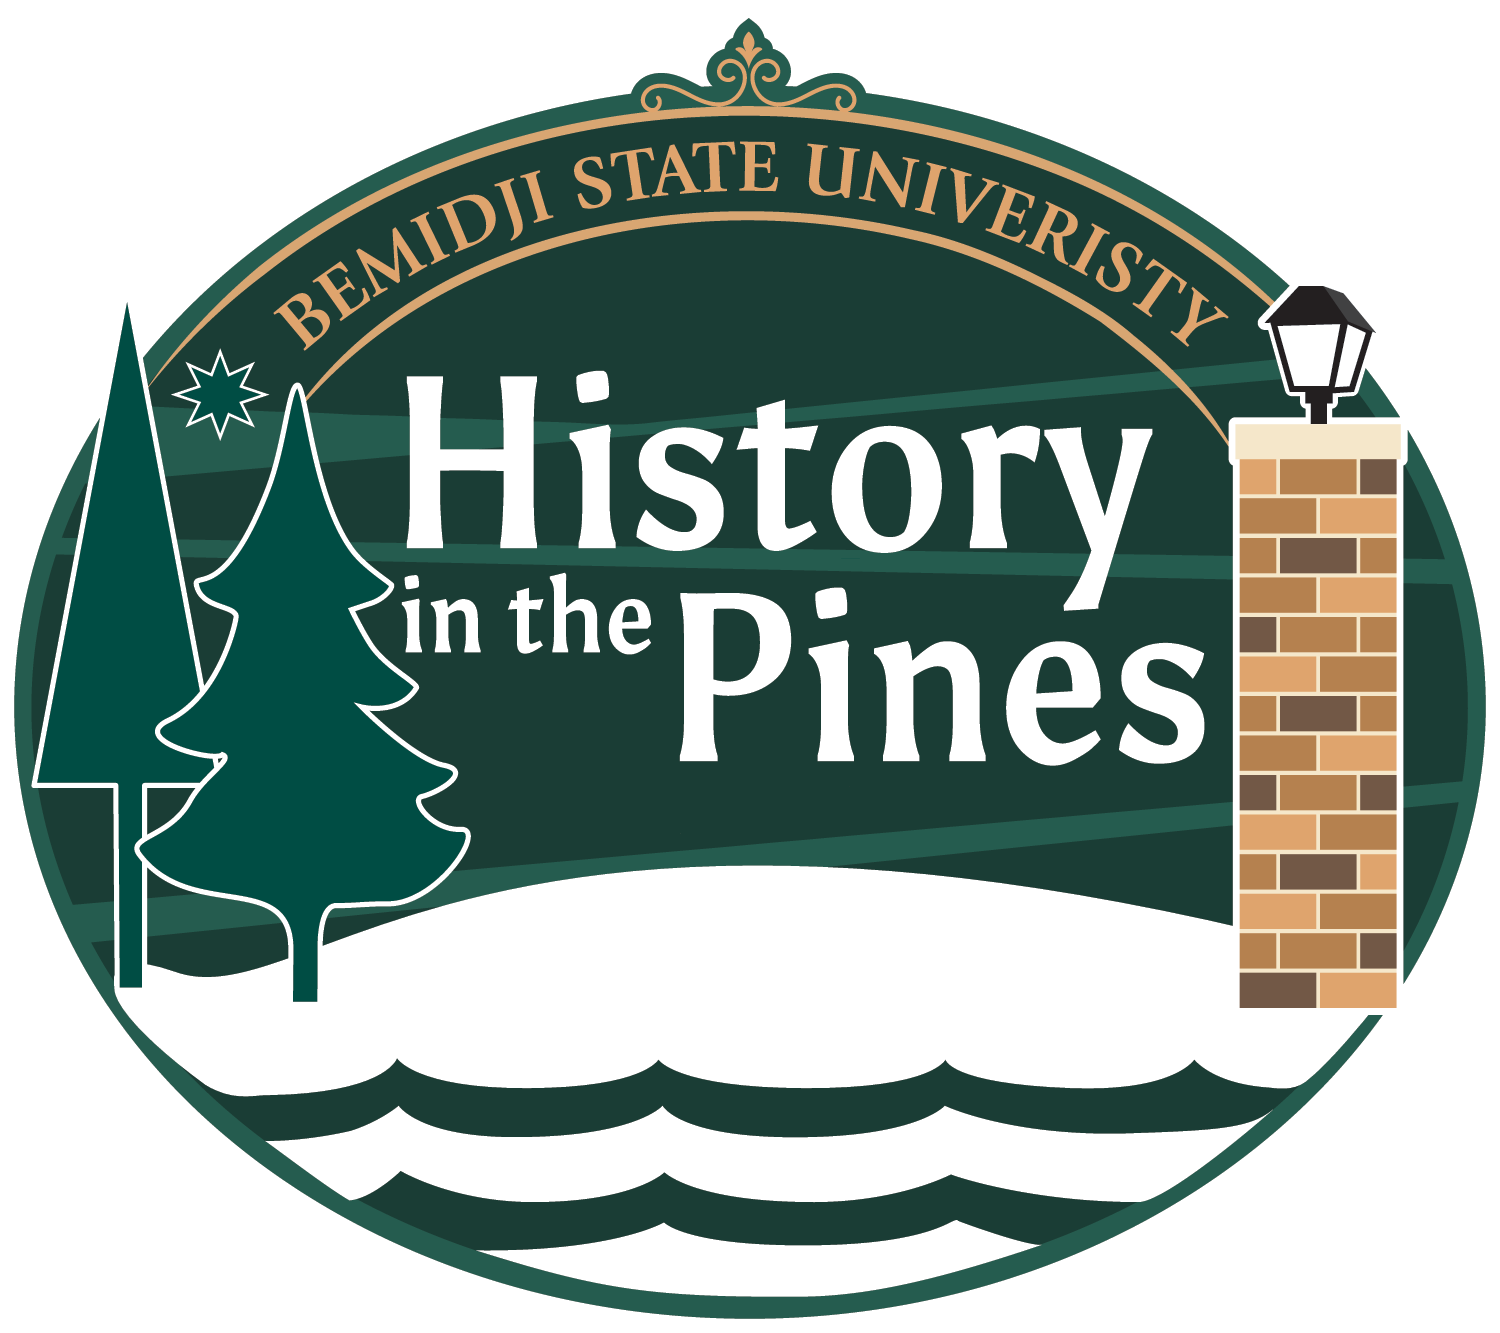 History in the Pines logo